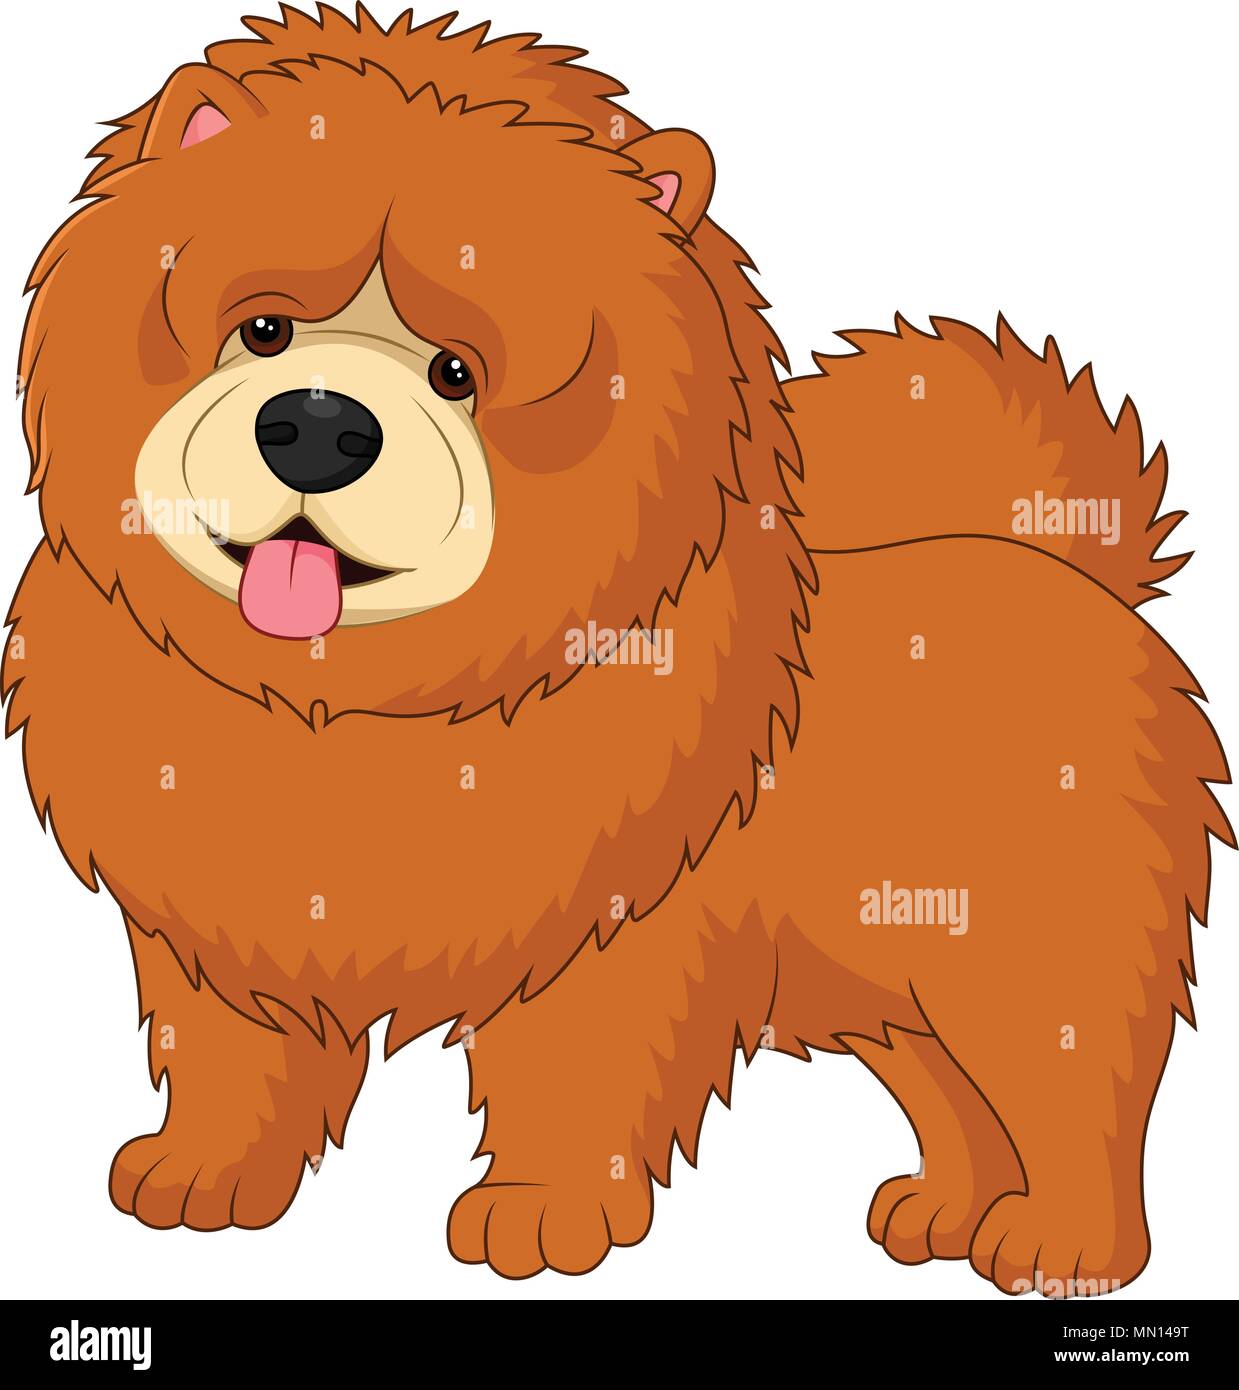 Chow chow dog breed Stock Vector